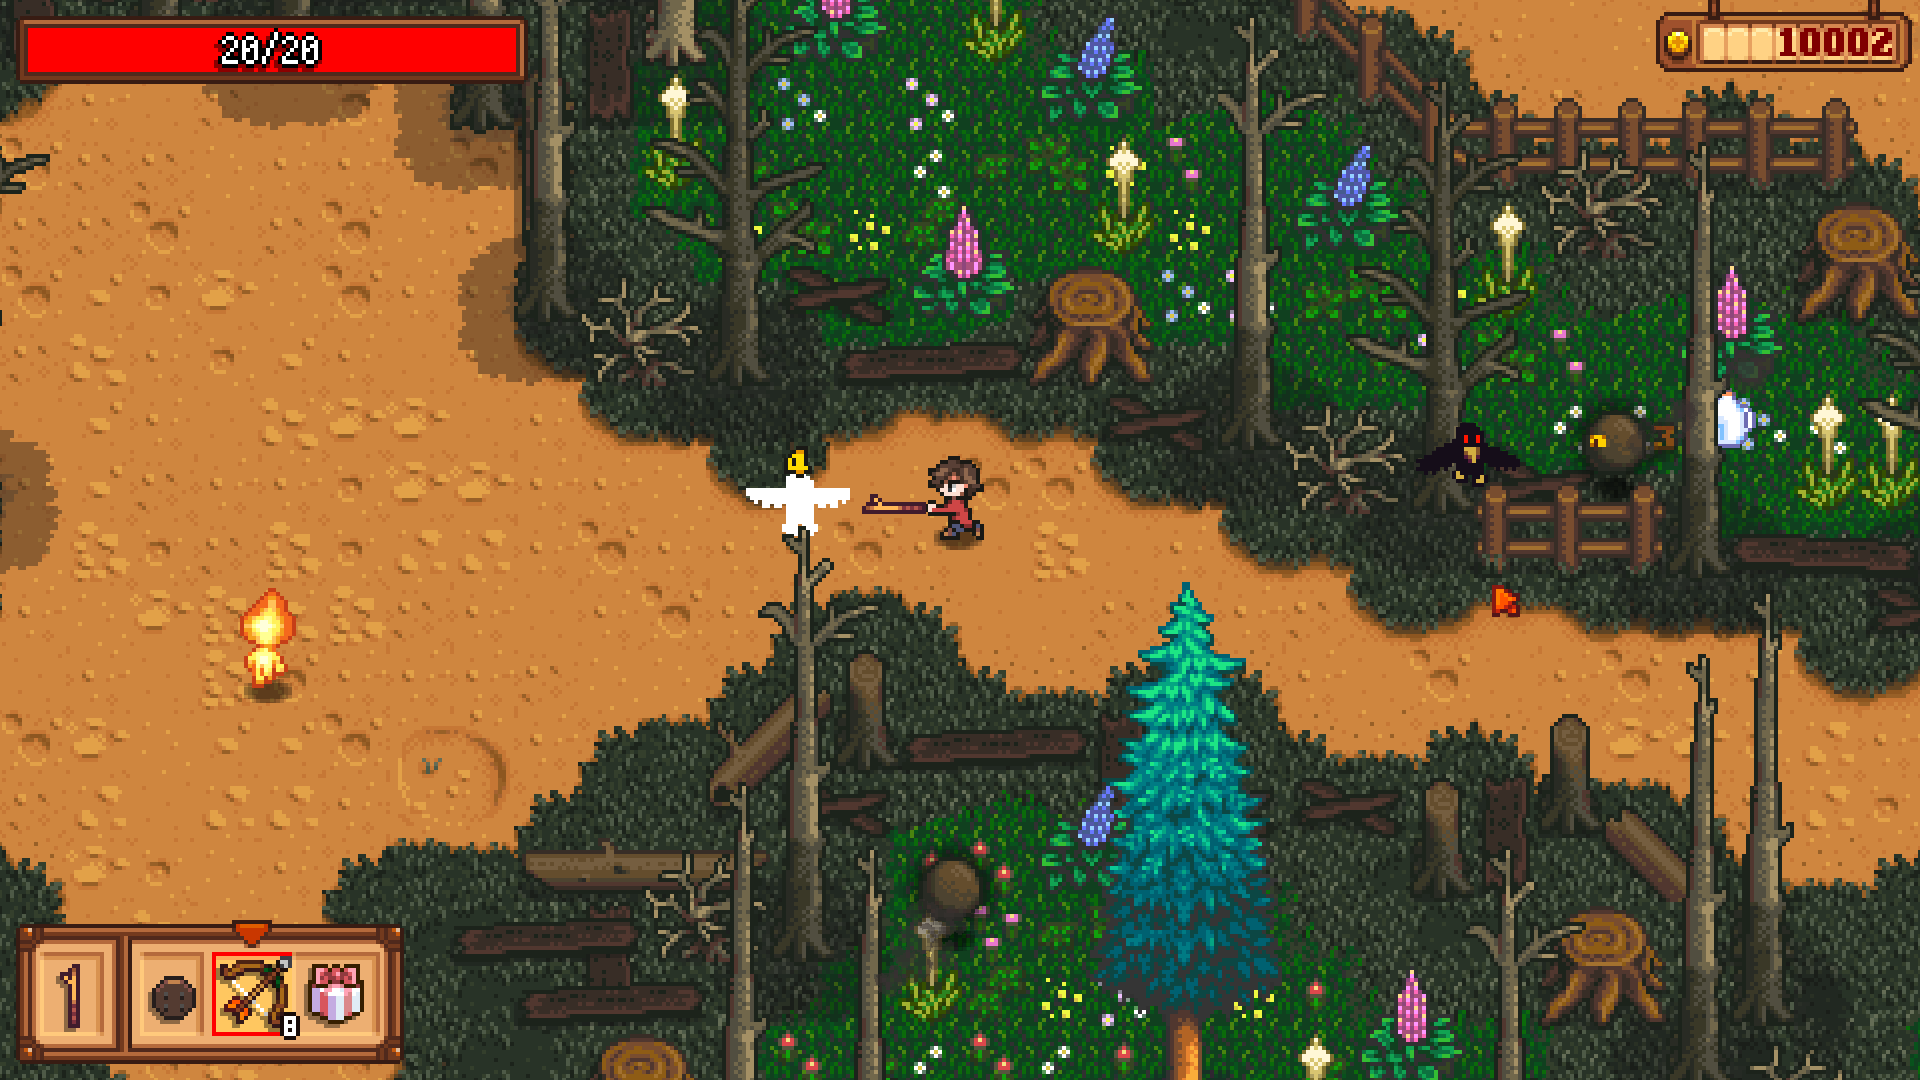 An image of character swinging a stick in the woods rendered in pixel art from Haunted Chocolatier.